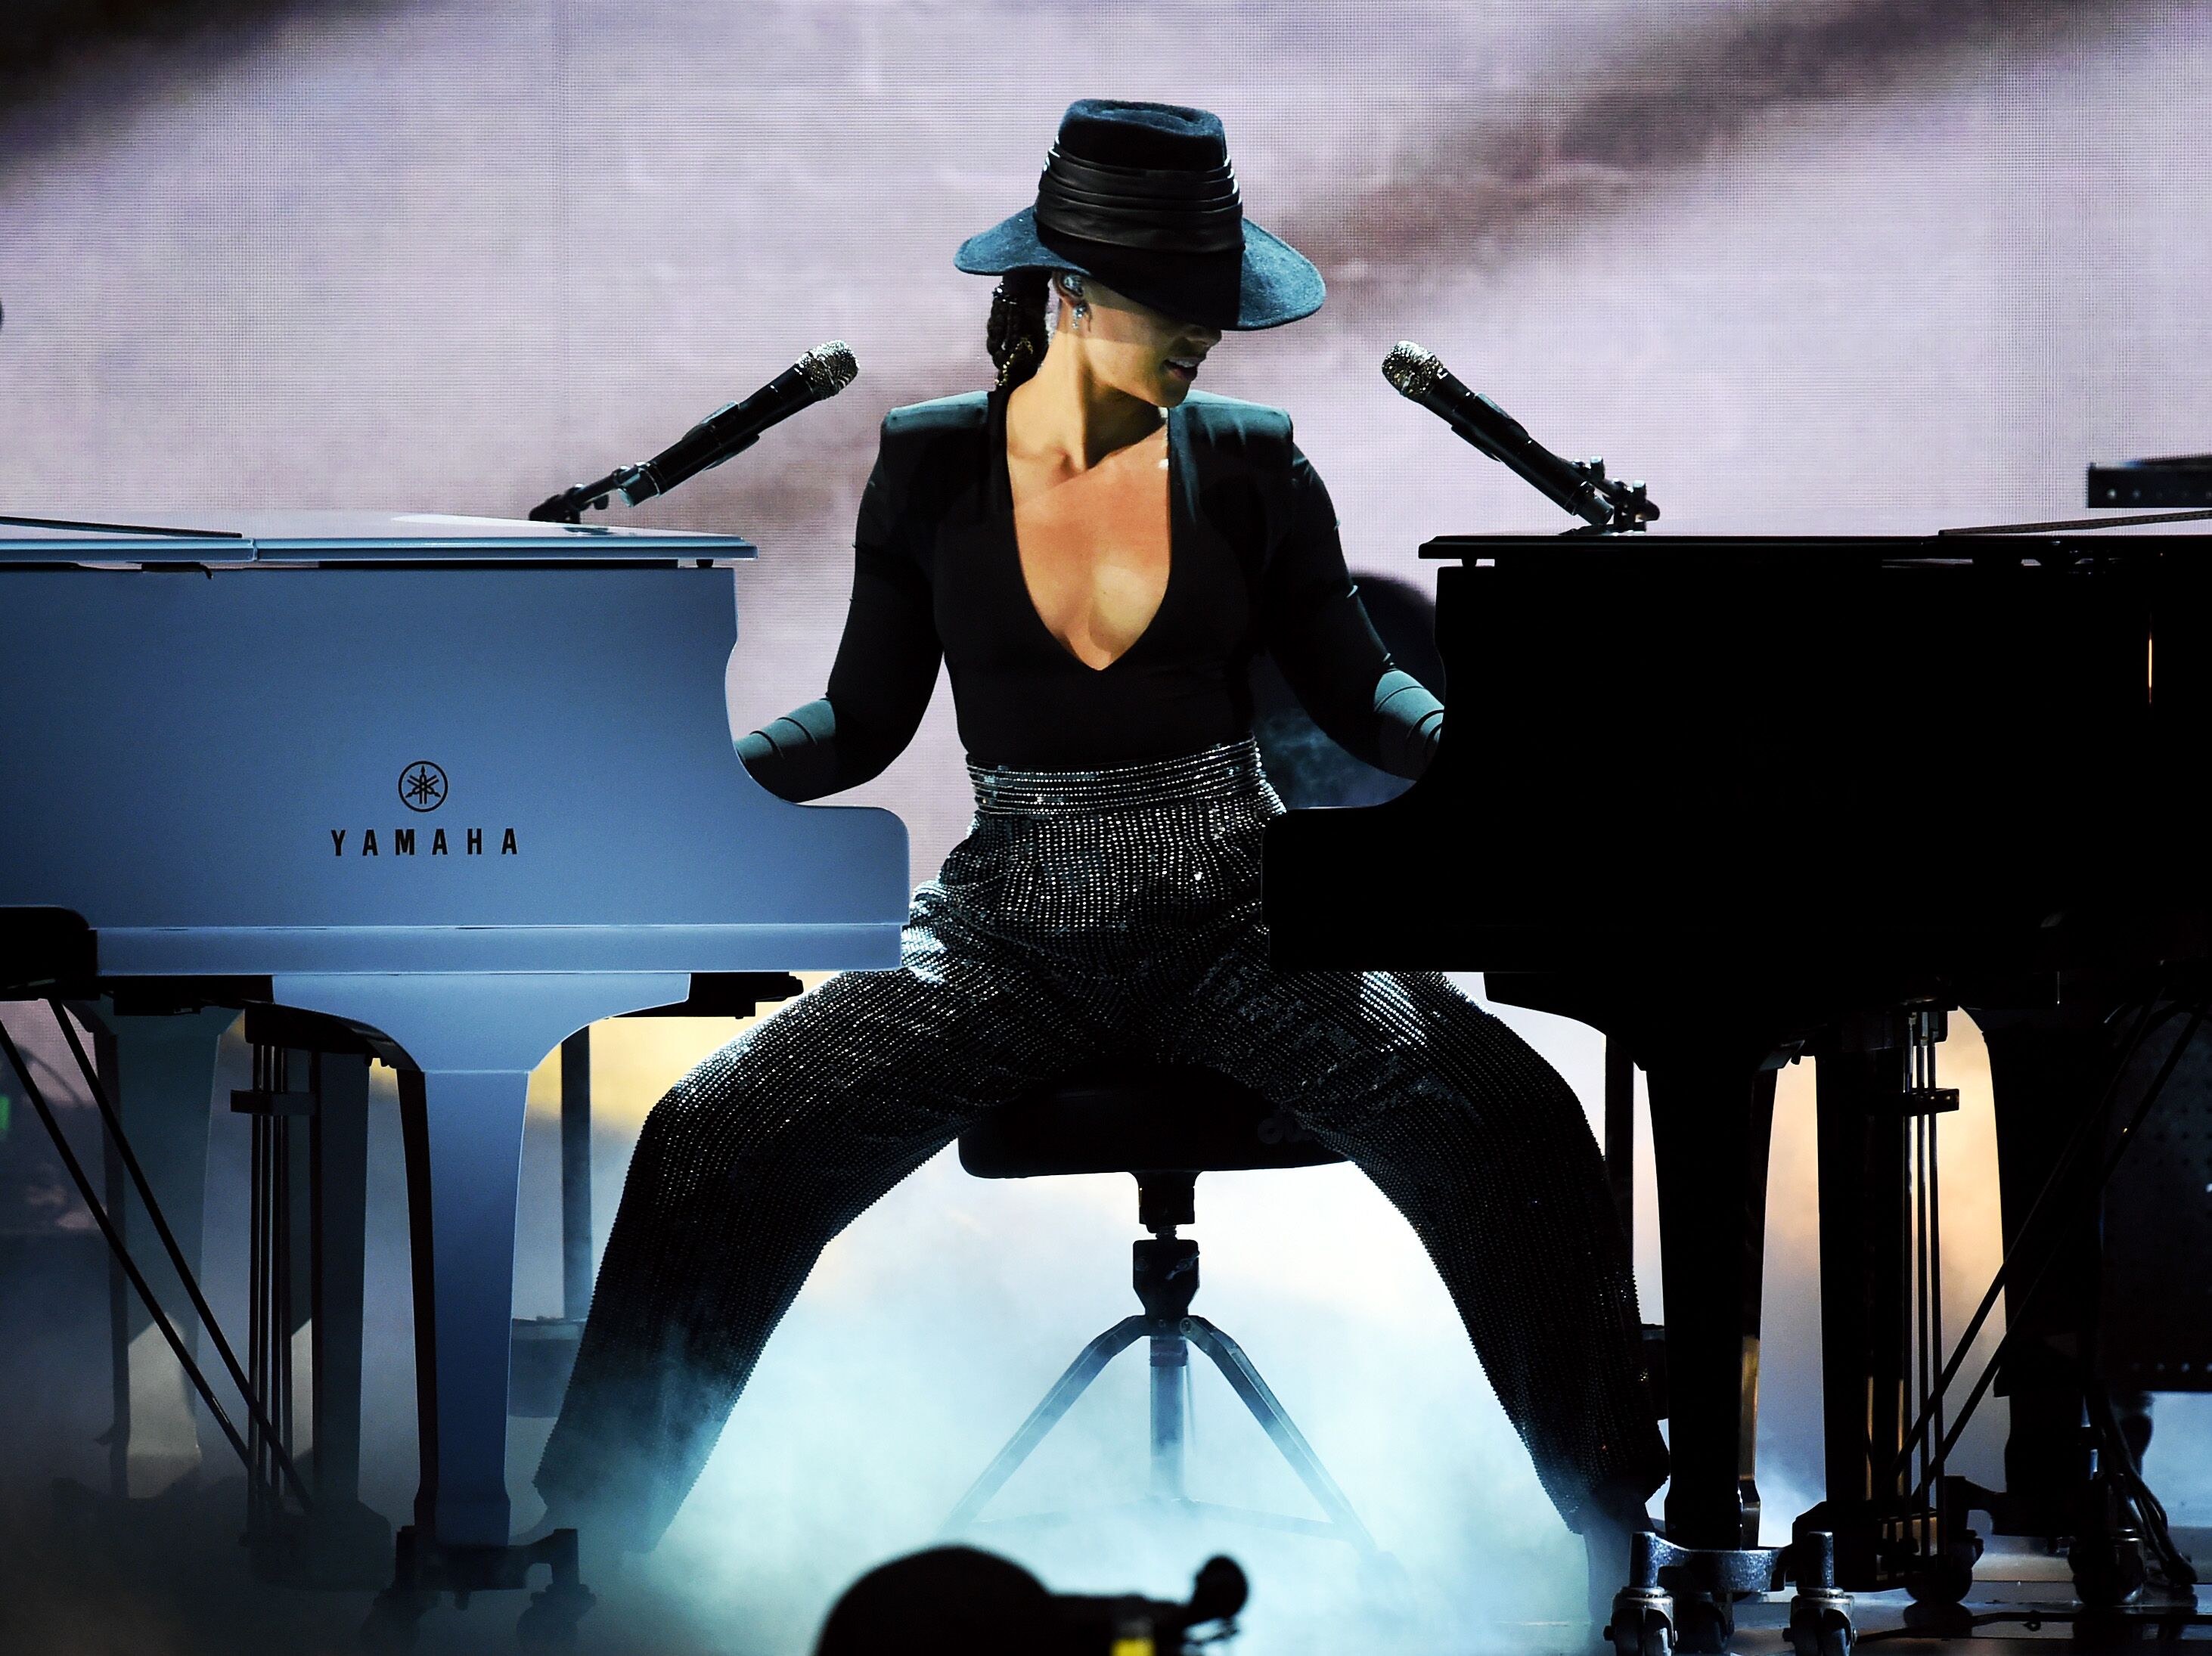 Singer/songwriter Alicia Keys in concert/ Source: Getty Images